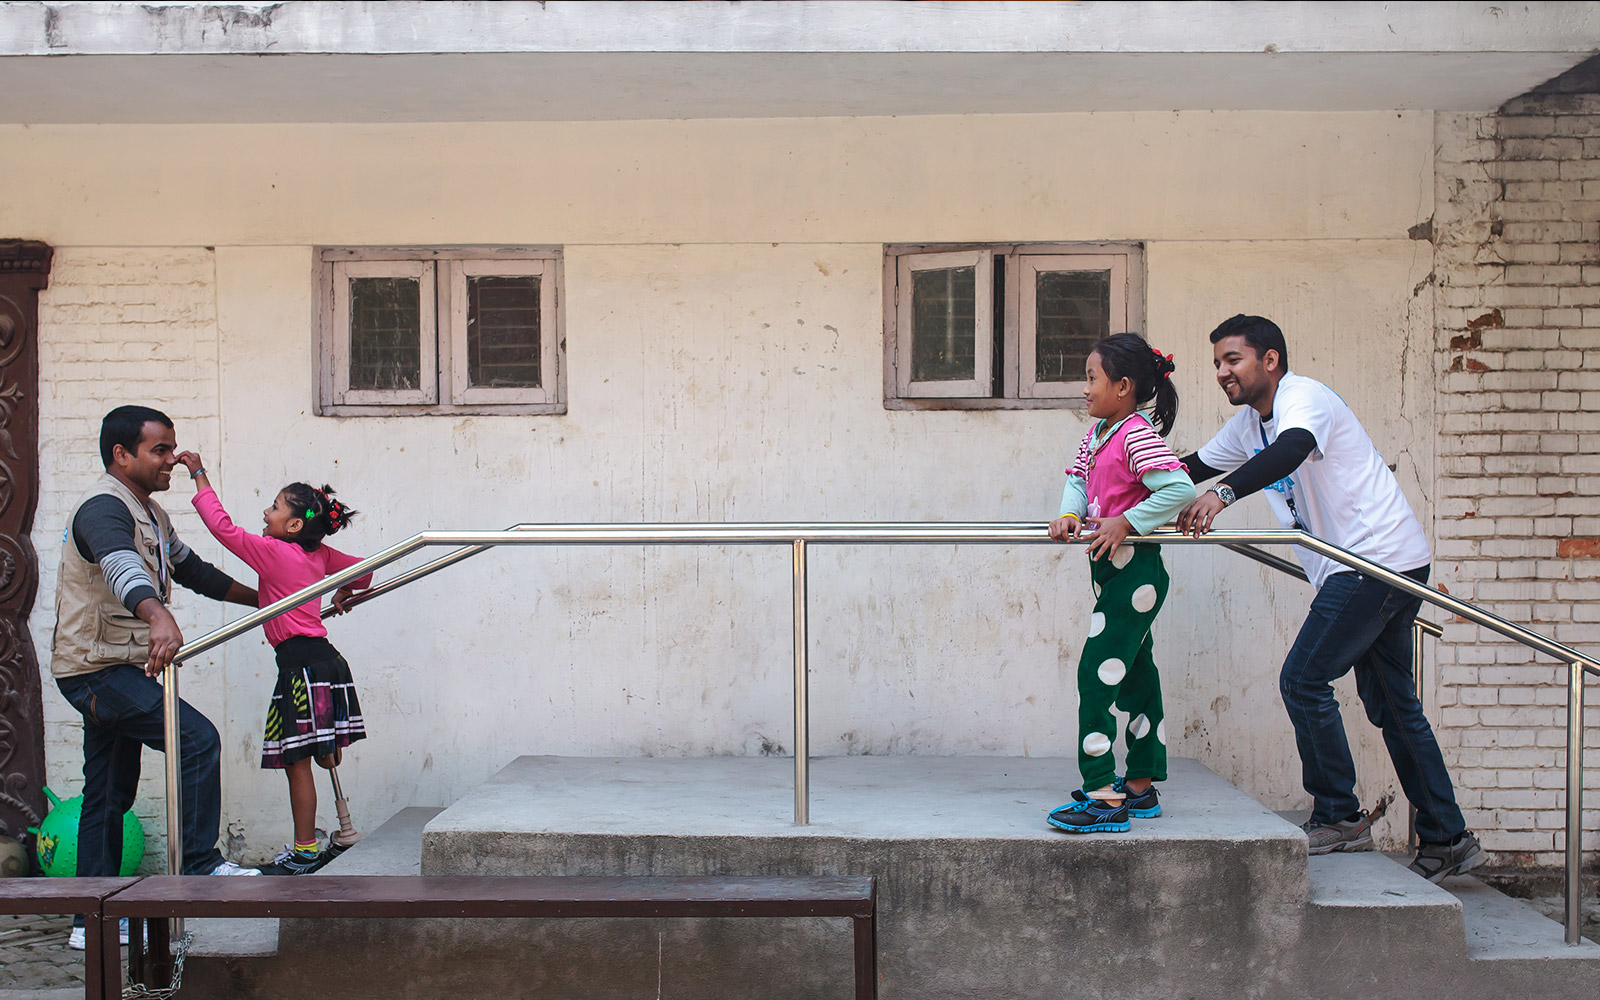 Nepal, Nirmala (left), with Jay from HI and Khendo (right) with Sudan from HI. Girls were both victims of the 2015 earthquake, fitted with a prosthesis, they follow rehabilitation sessions.